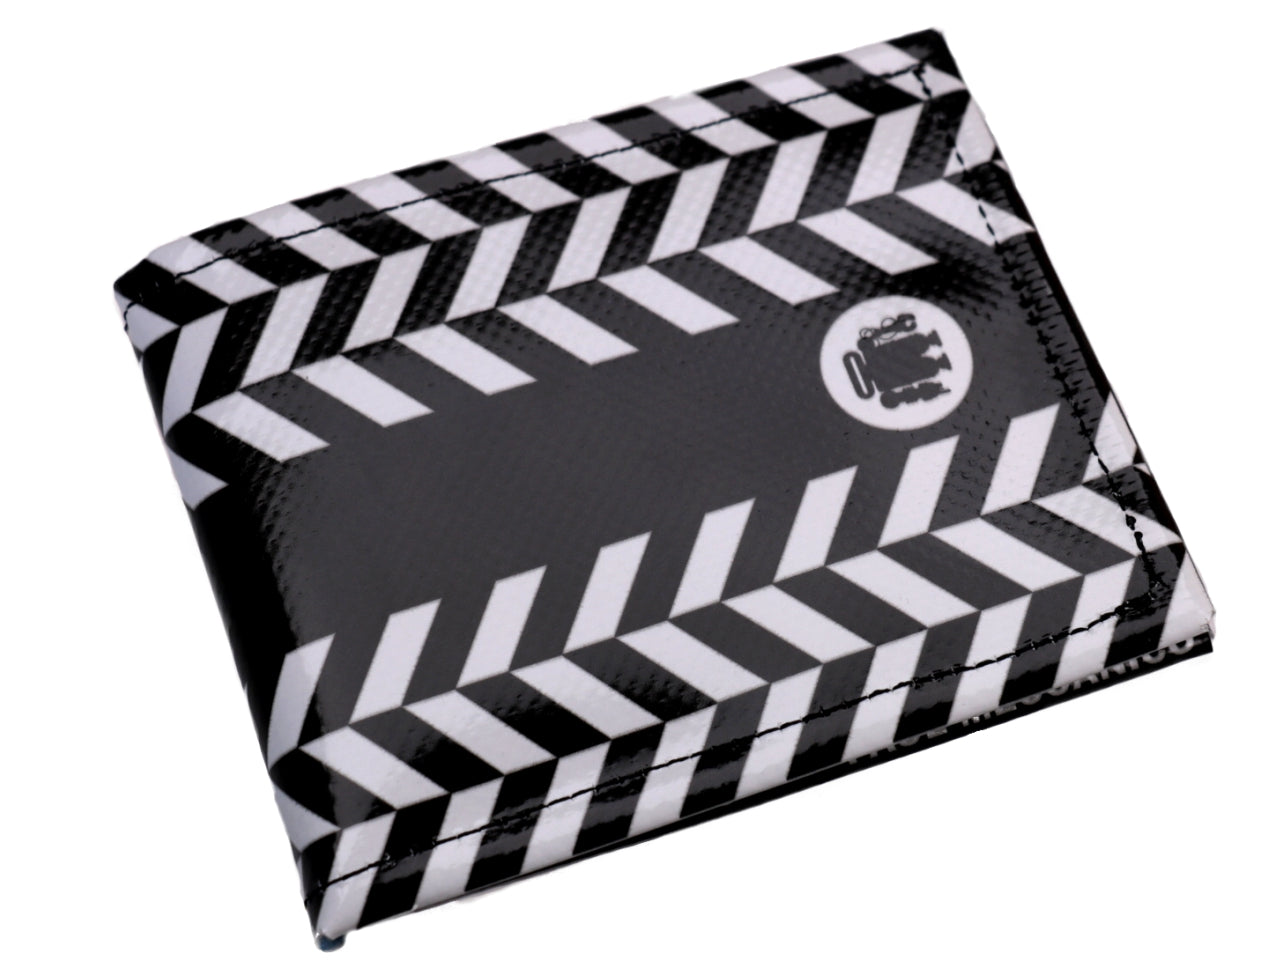 MEN'S WALLET BLACK AND WHITE GEOMETRIC FANTASY. MODEL CRIK MADE OF LORRY TARPAULIN. - Limited Edition Paul Meccanico